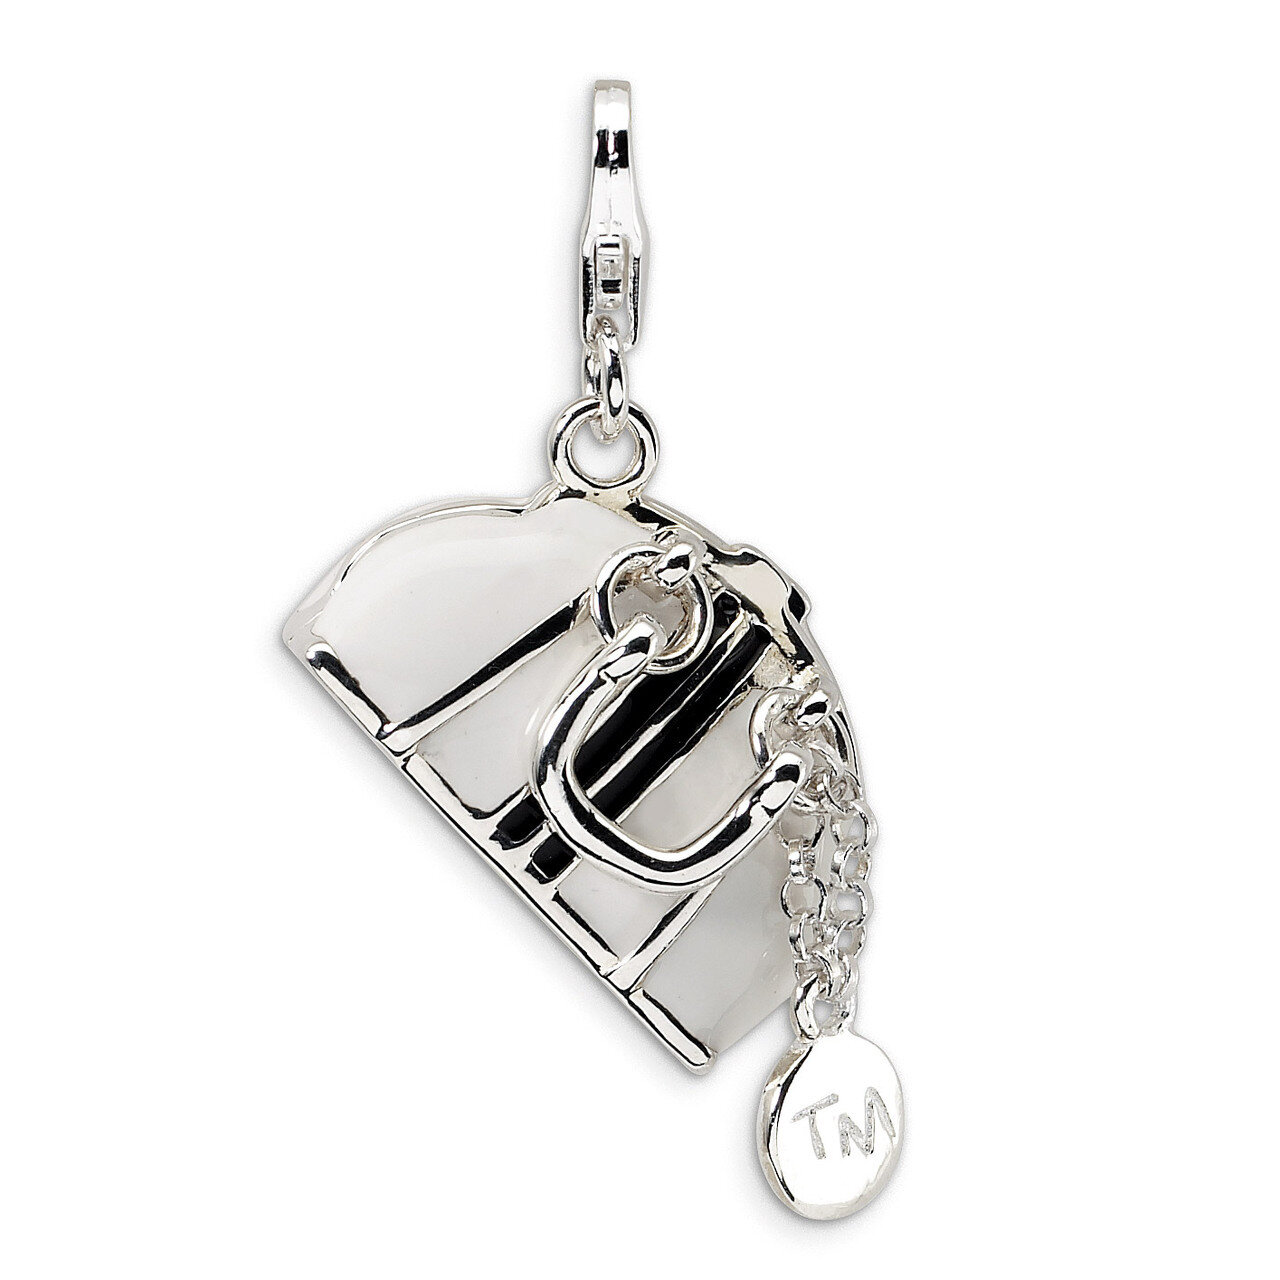 3-D Enameled Purse Charm Sterling Silver QCC223